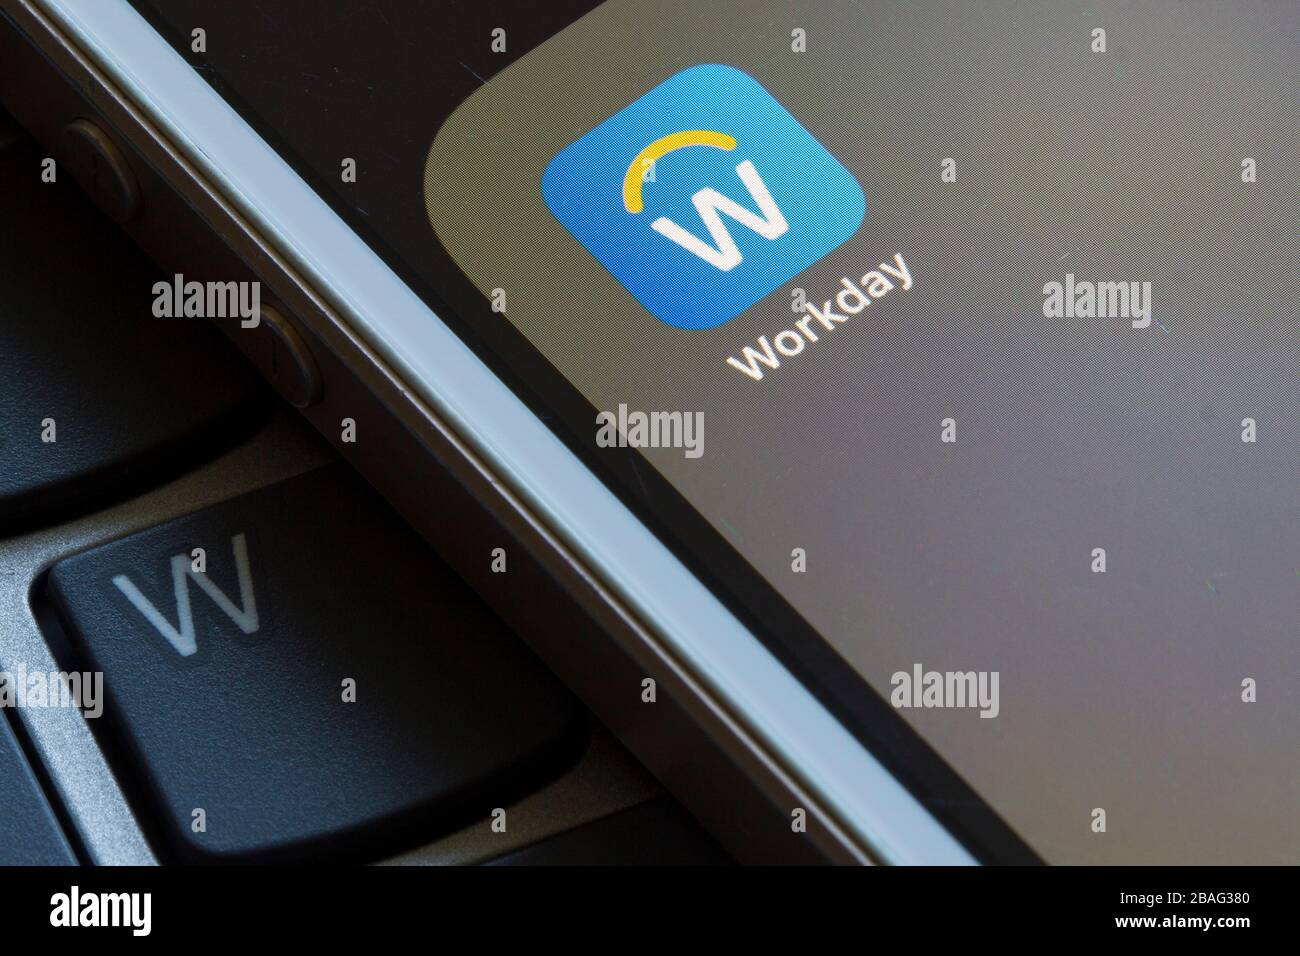 Workday mobile app icon closeup. The Workday app provides mobile access to Workday cloud platform enterprise-class applications on the go. Stock Photo